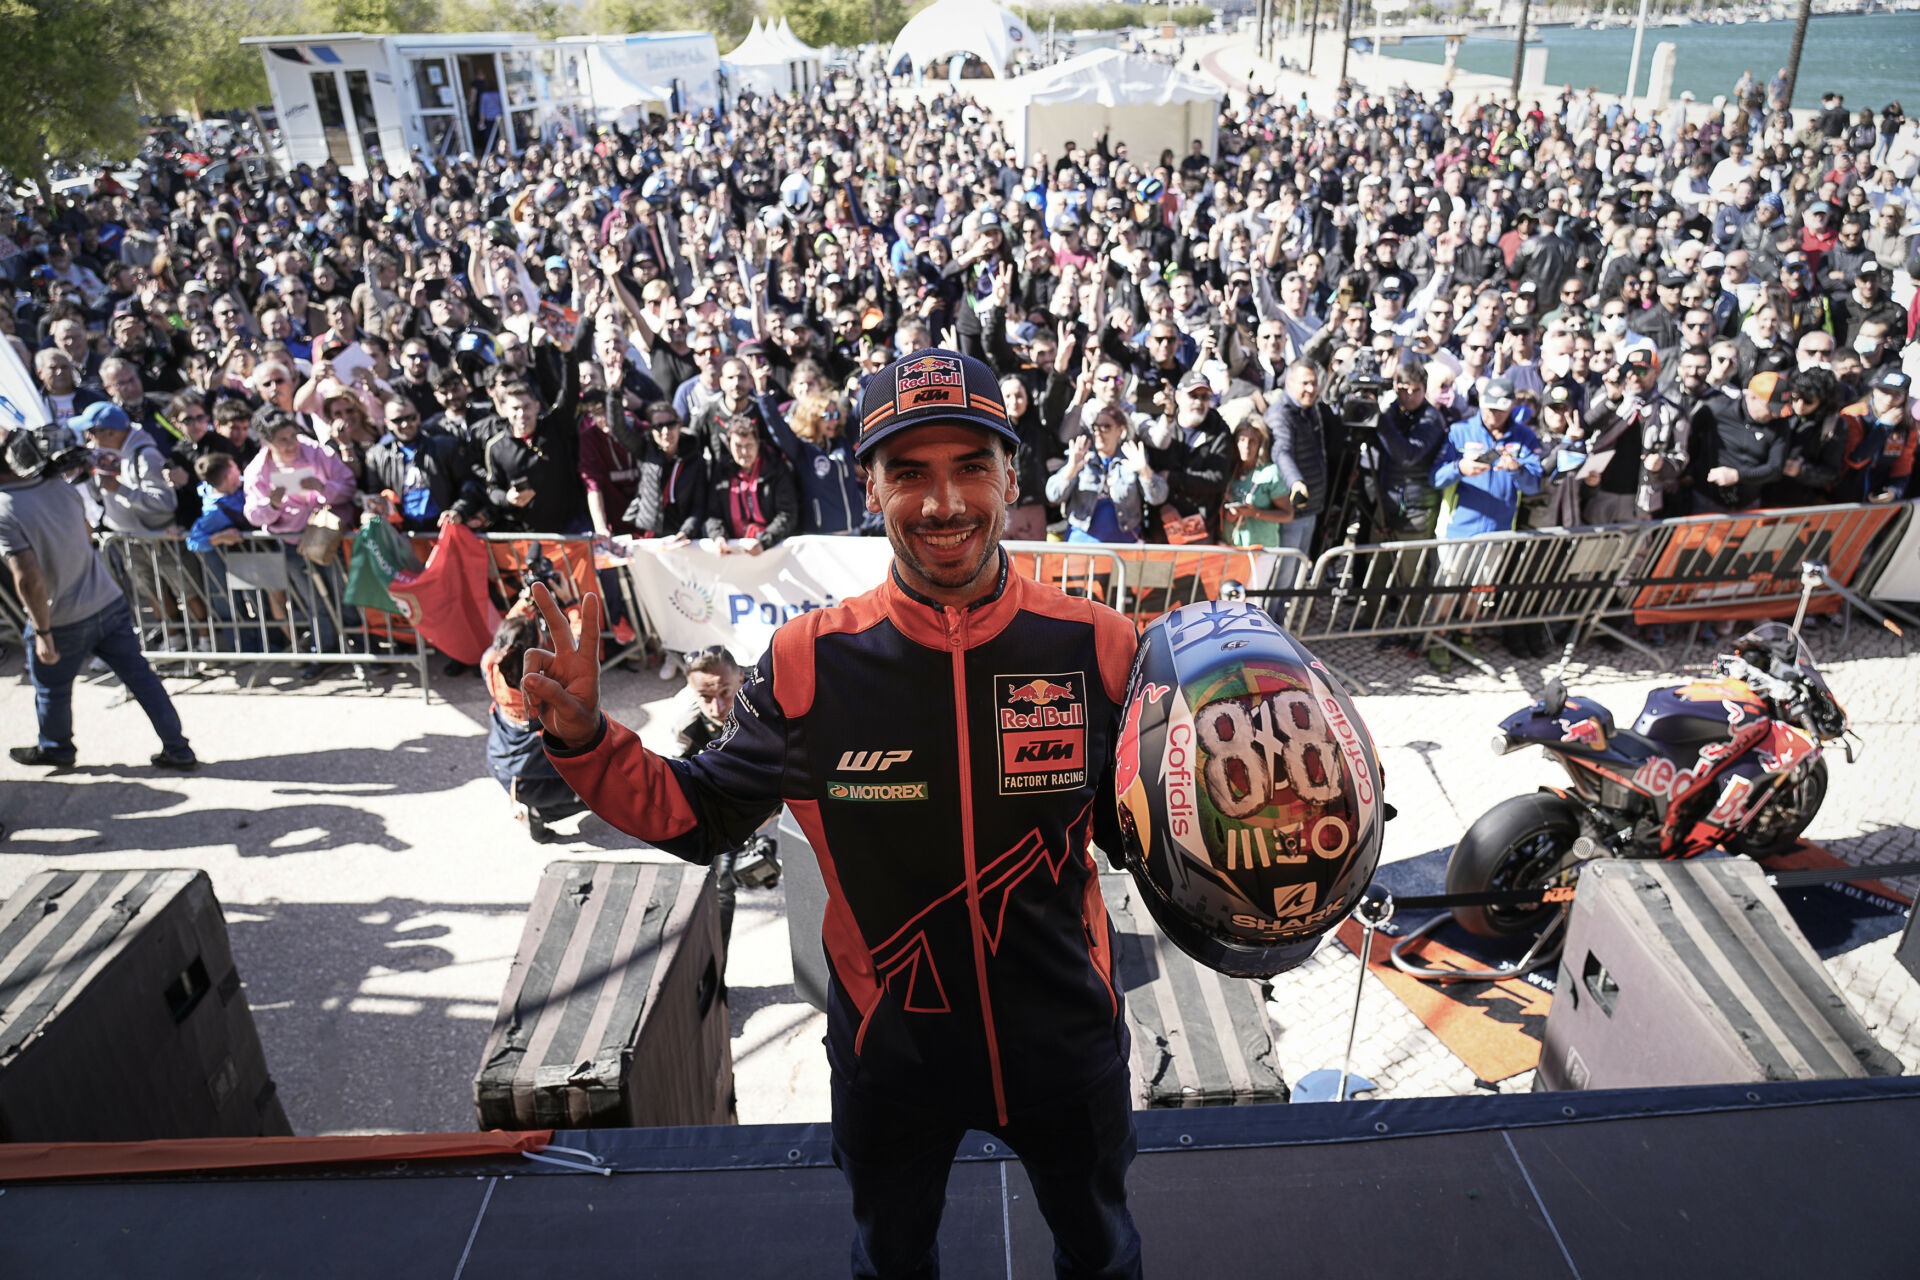 Miguel Oliveira at the pre-parade event in Portugal. Photo courtesy Dorna.